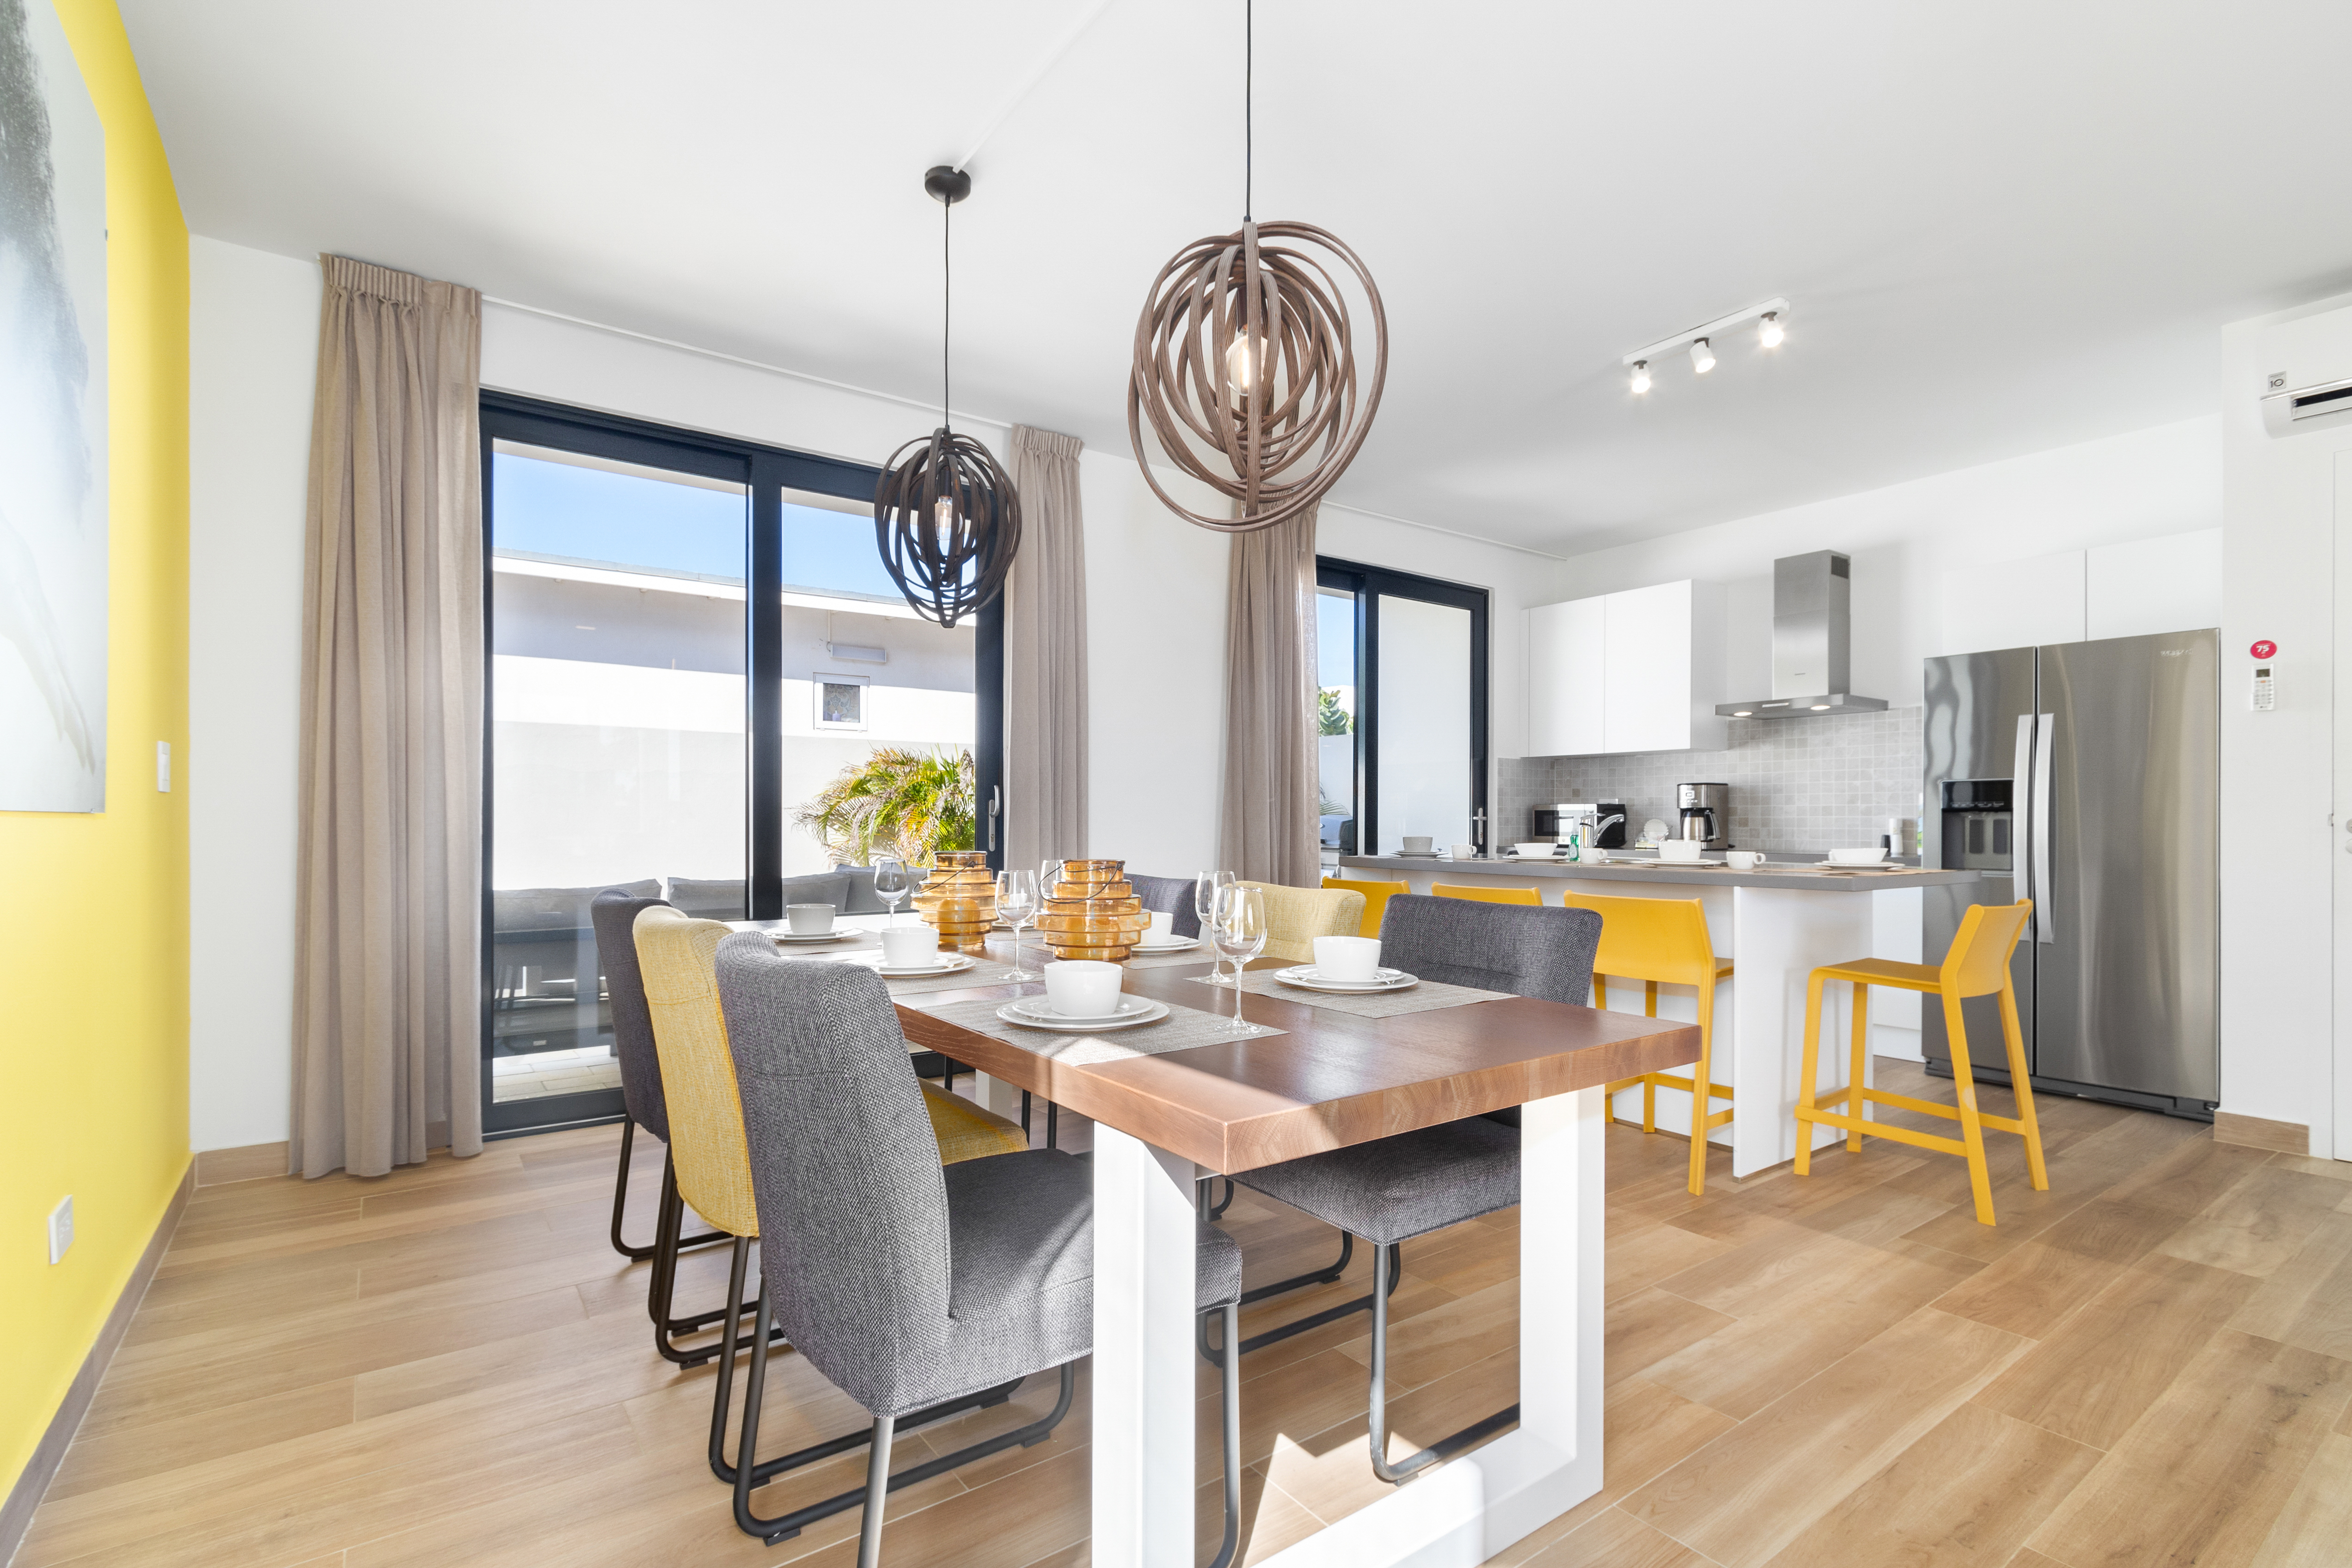 Charming Dining Area of the 3BR Townhouse in Noord Aruba - 6 Persons Dining - Quality materials, such as a sleek dining table and comfortable chairs - Modern Design - Intimate ambiance created through soft, ambient lighting - Elegant Decor